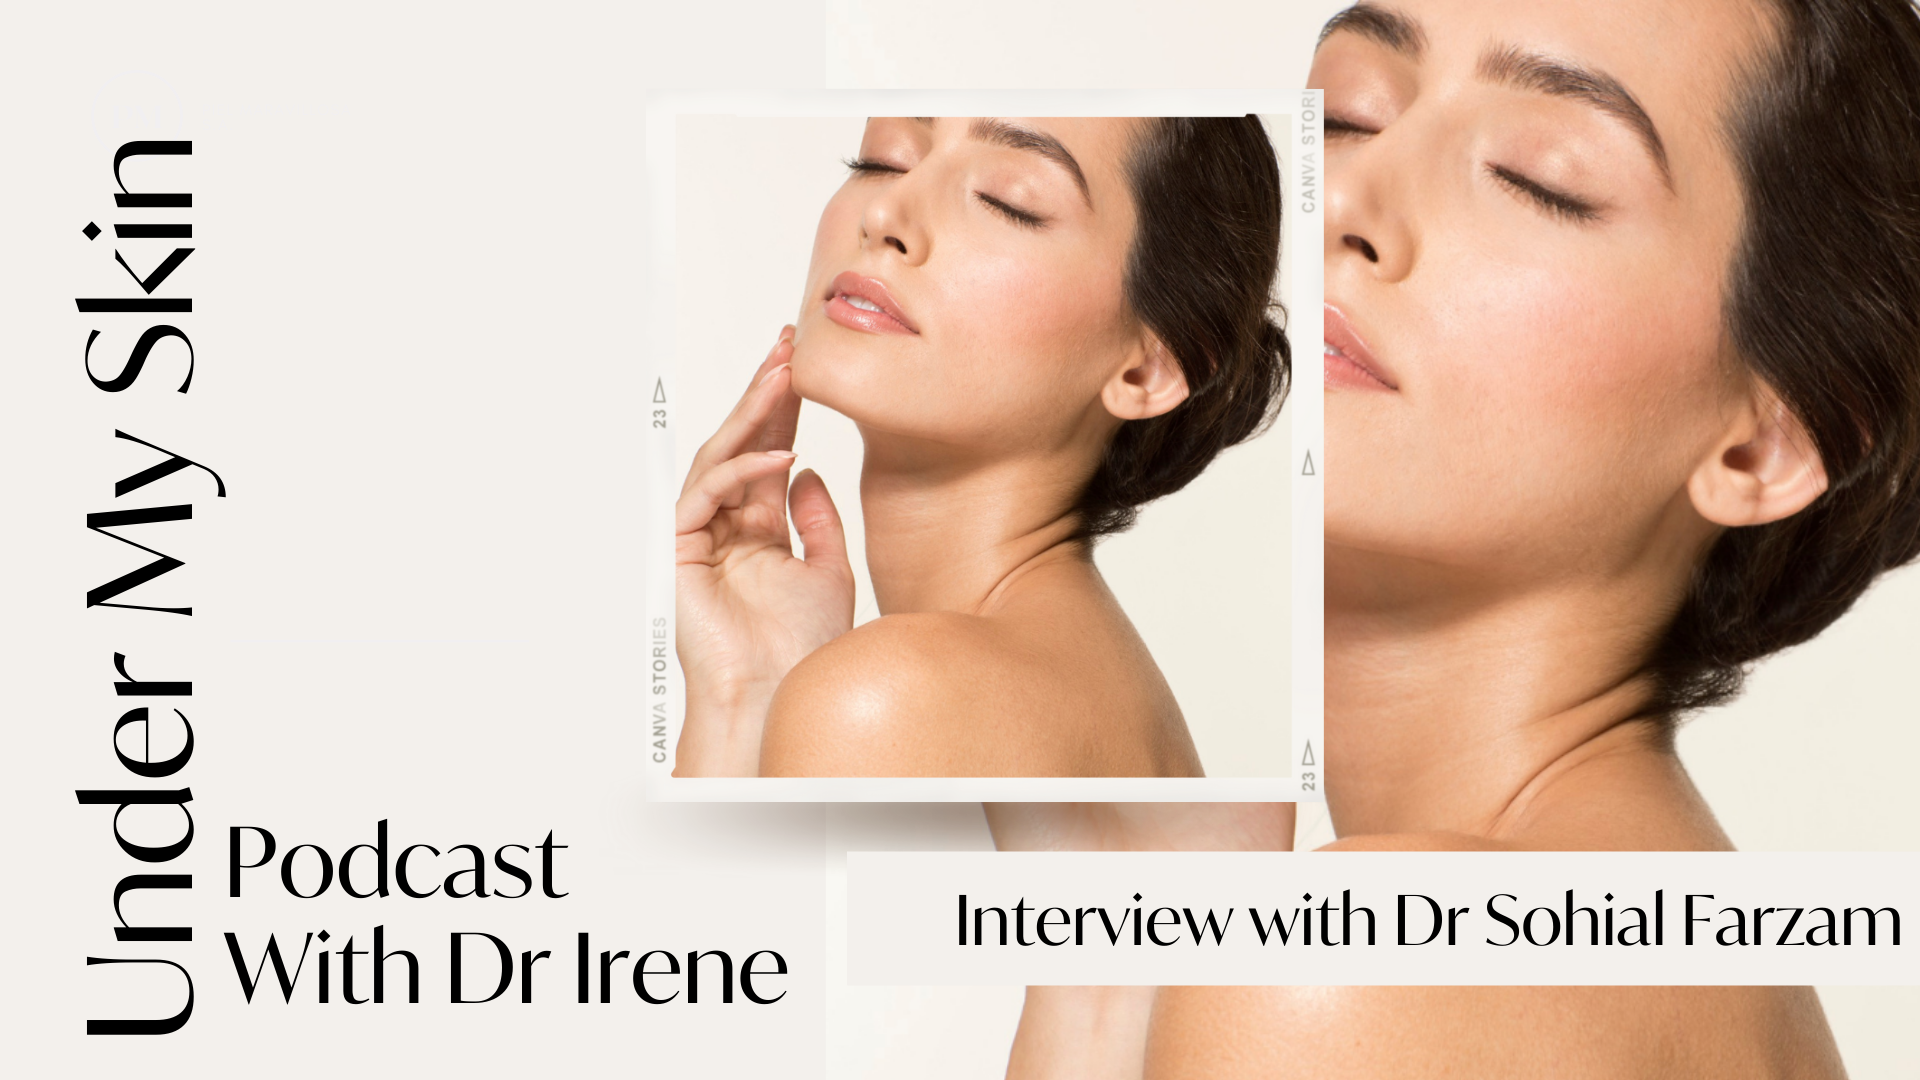 Under My Skin Podcast: Interview with Dr Sohial Farzam, Chinese Medicine